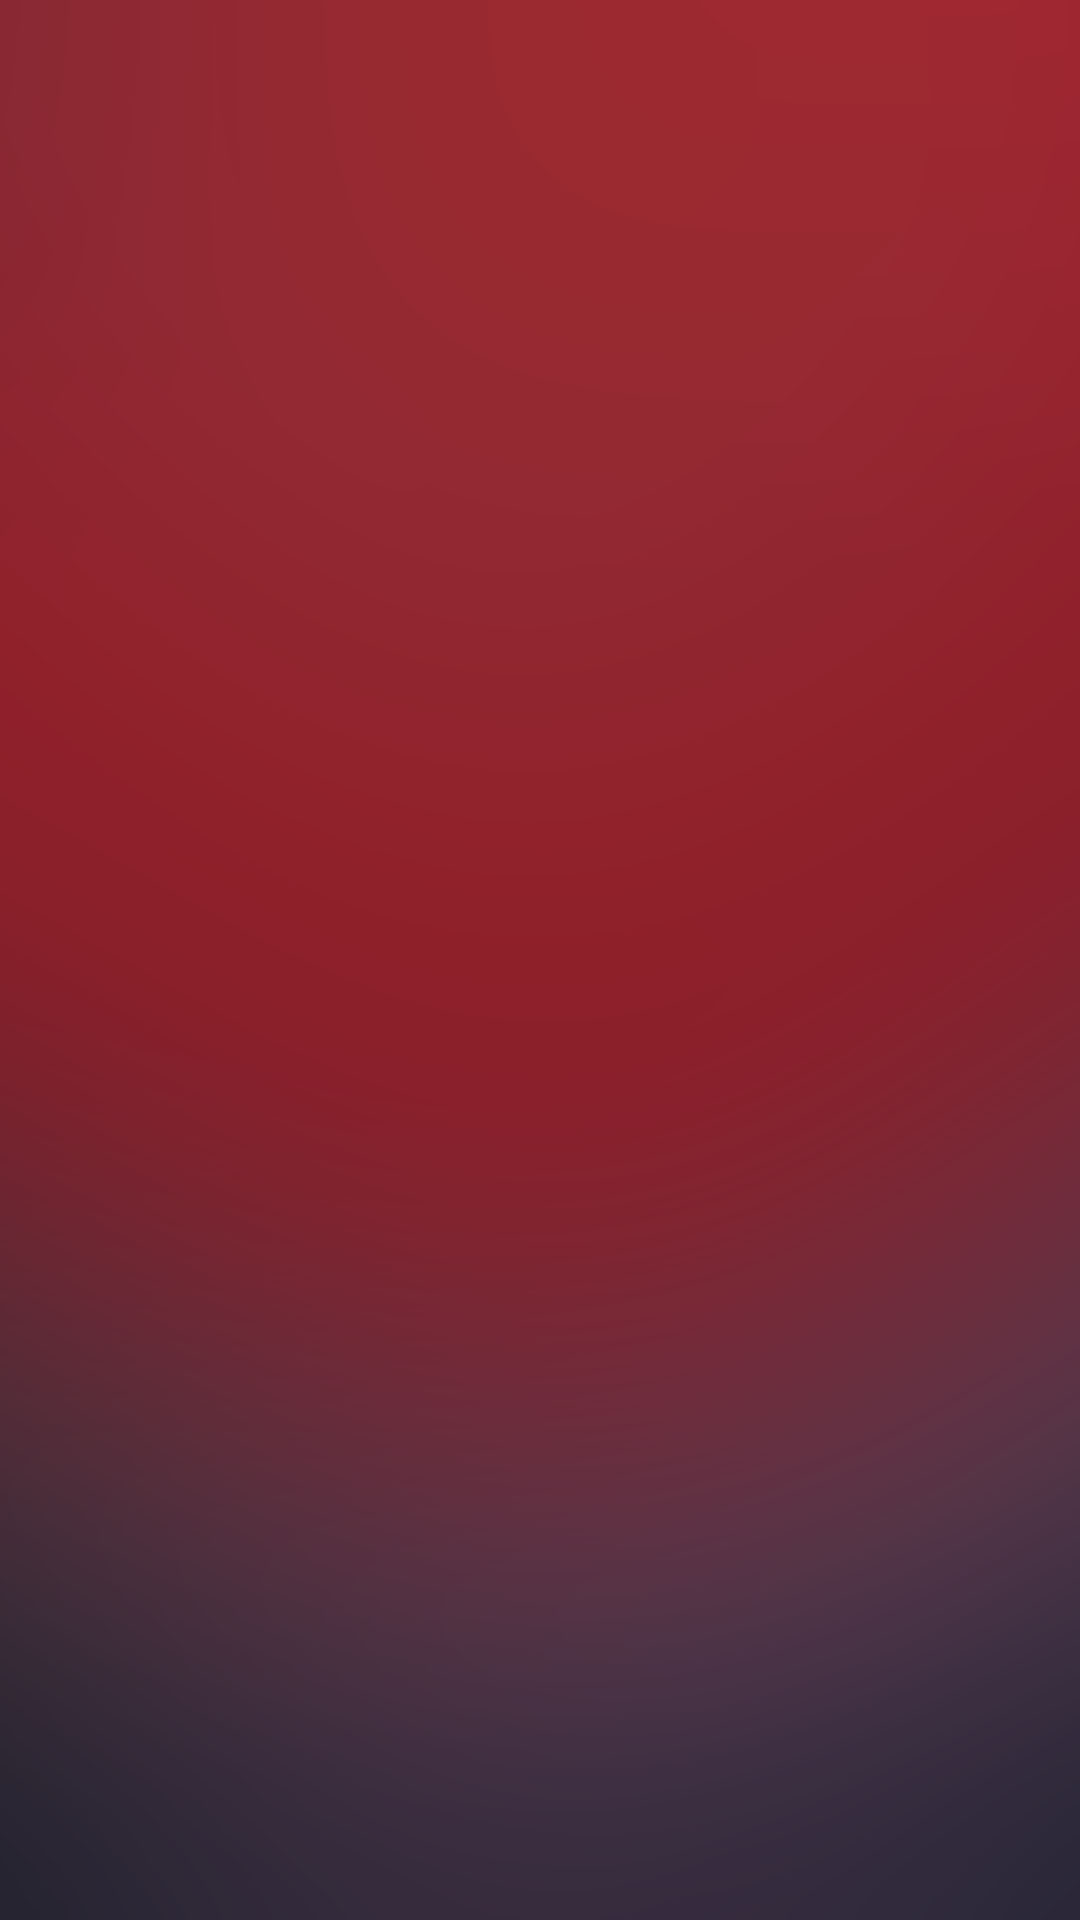 Dark Red Gradient Simple Android Wallpaper …